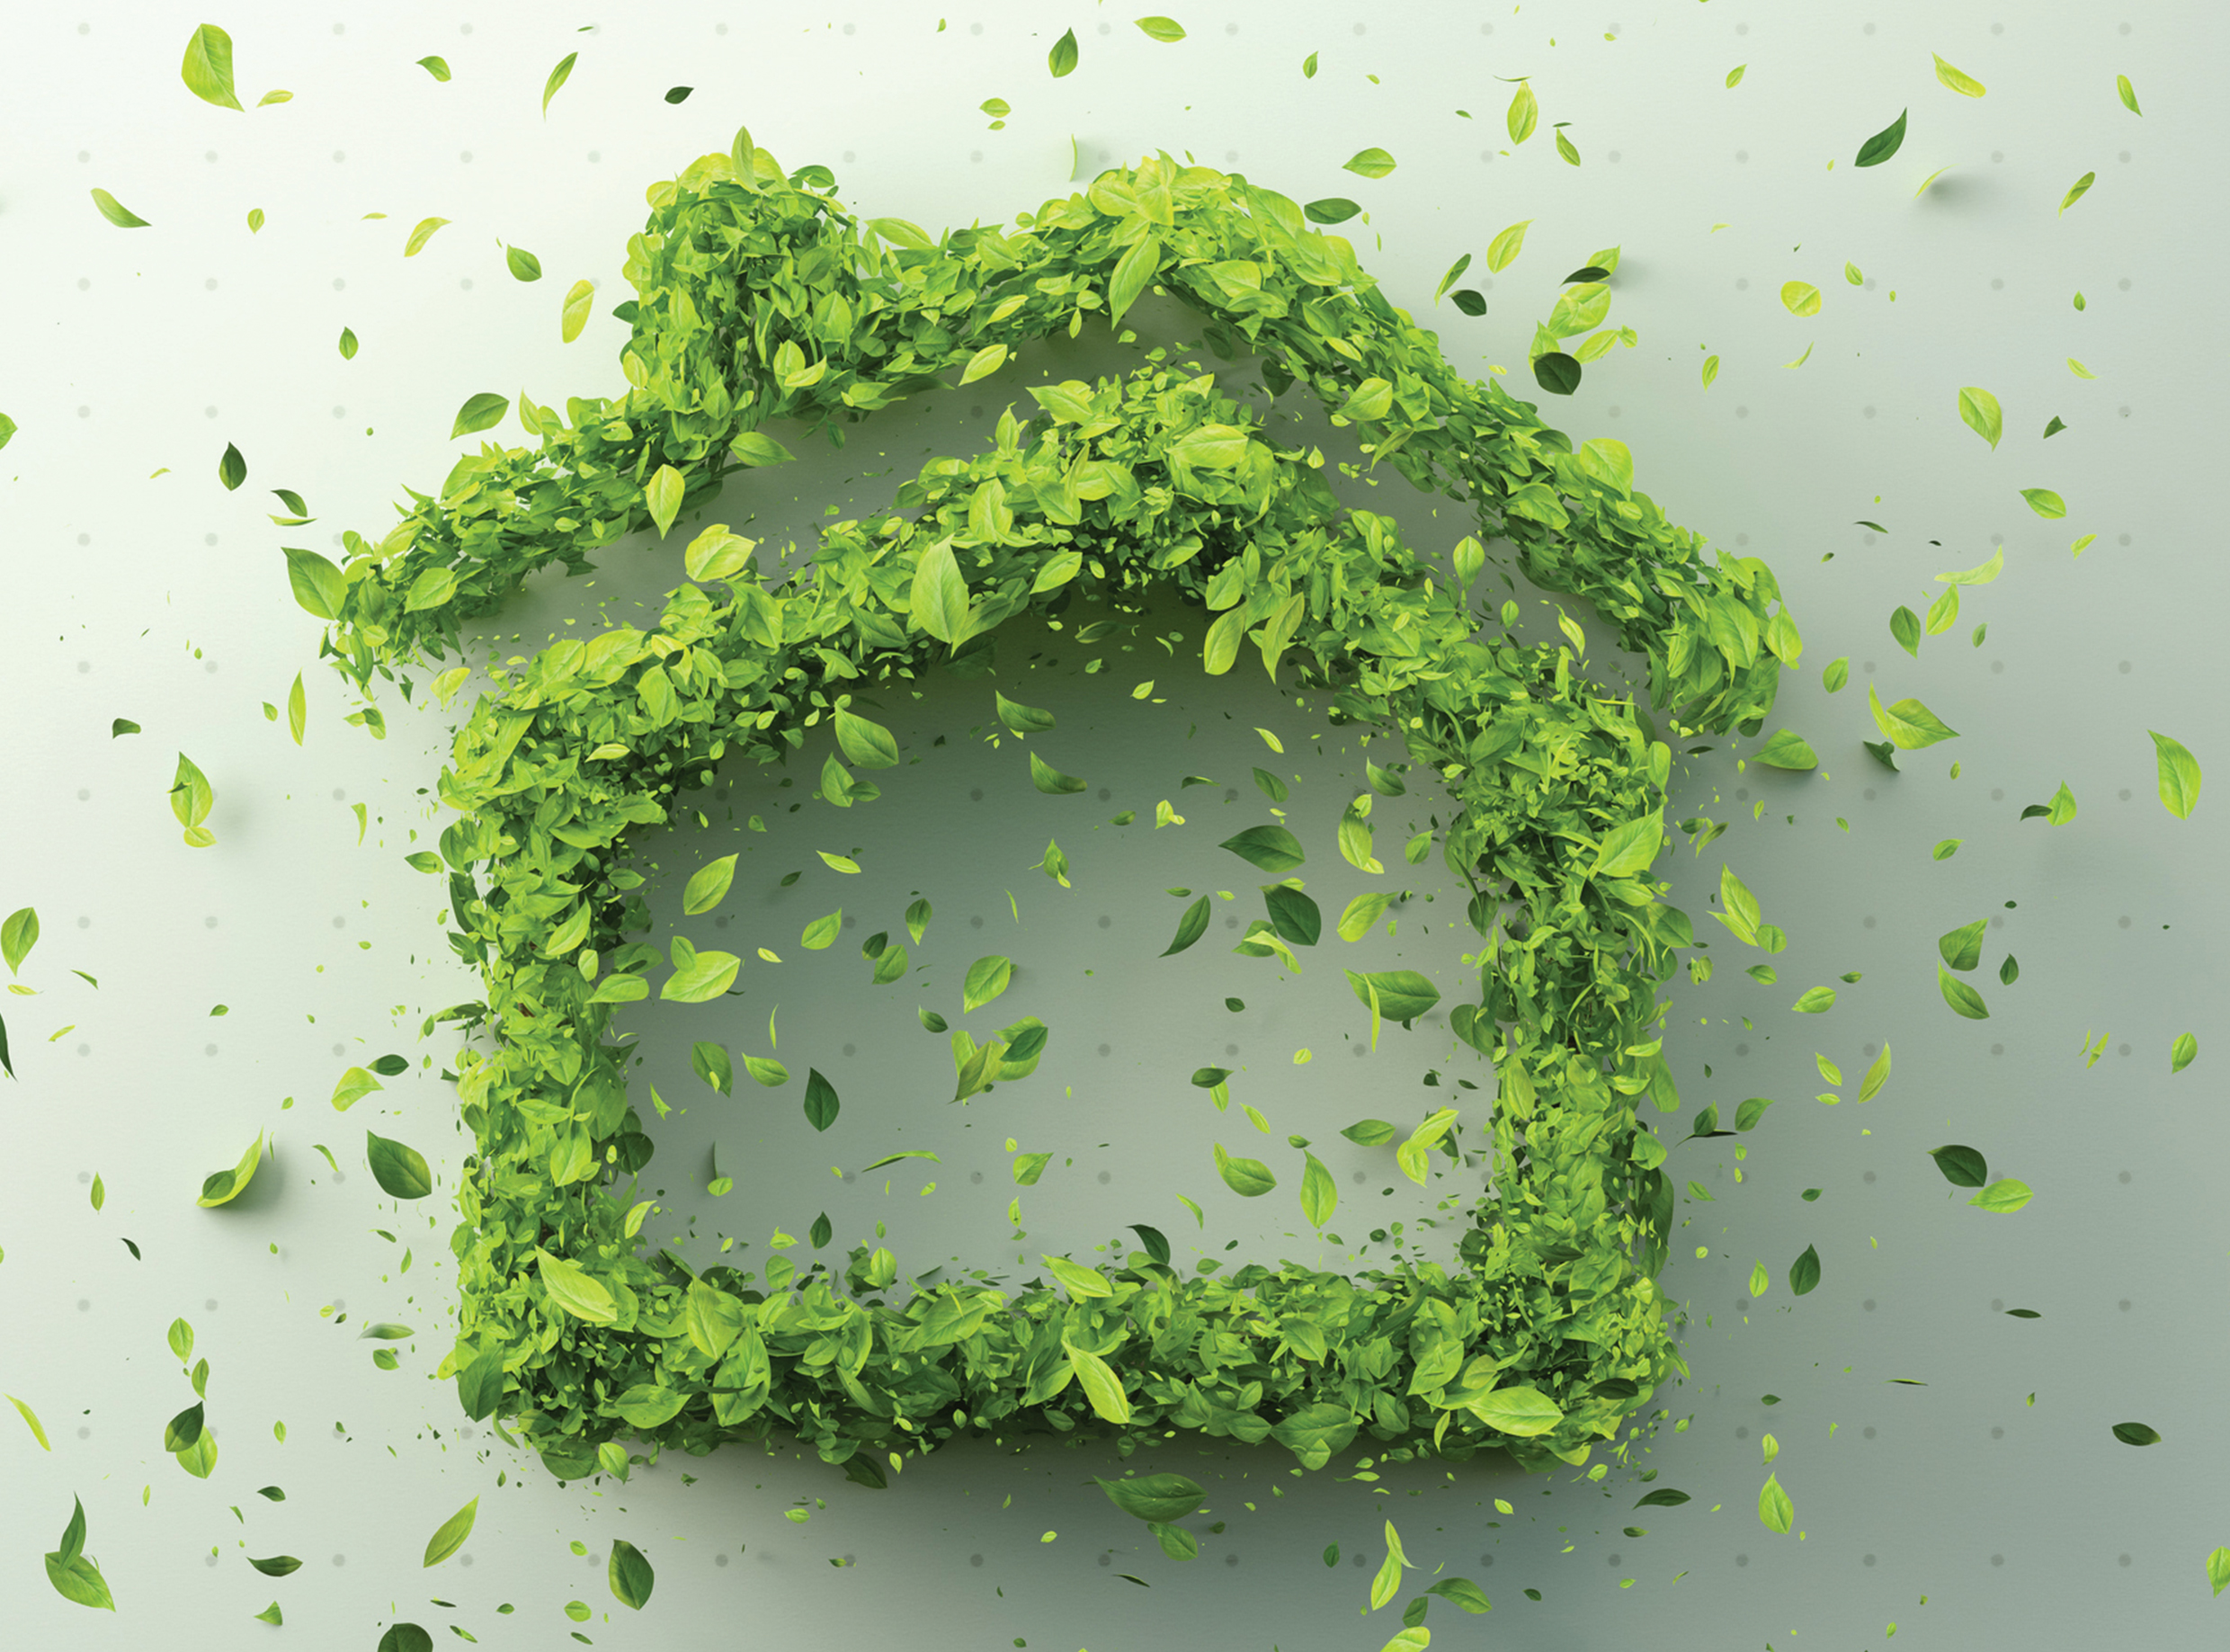 Turn your home into a sustainable one